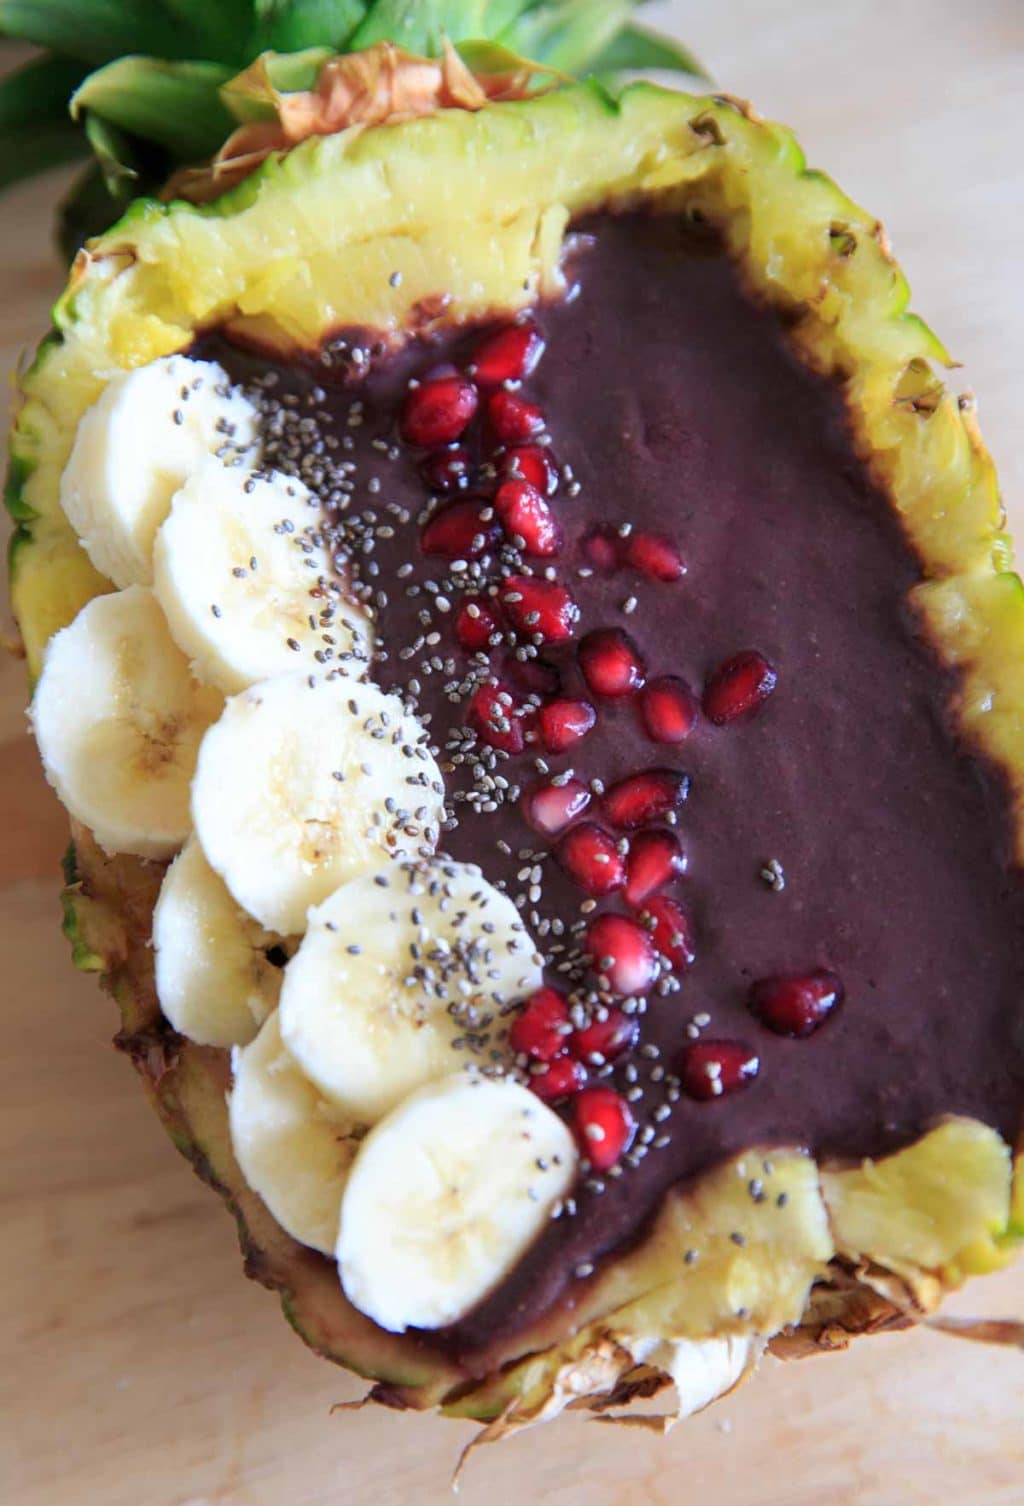 Pineapple boat with banana, pomegranate arils, and chia seeds.